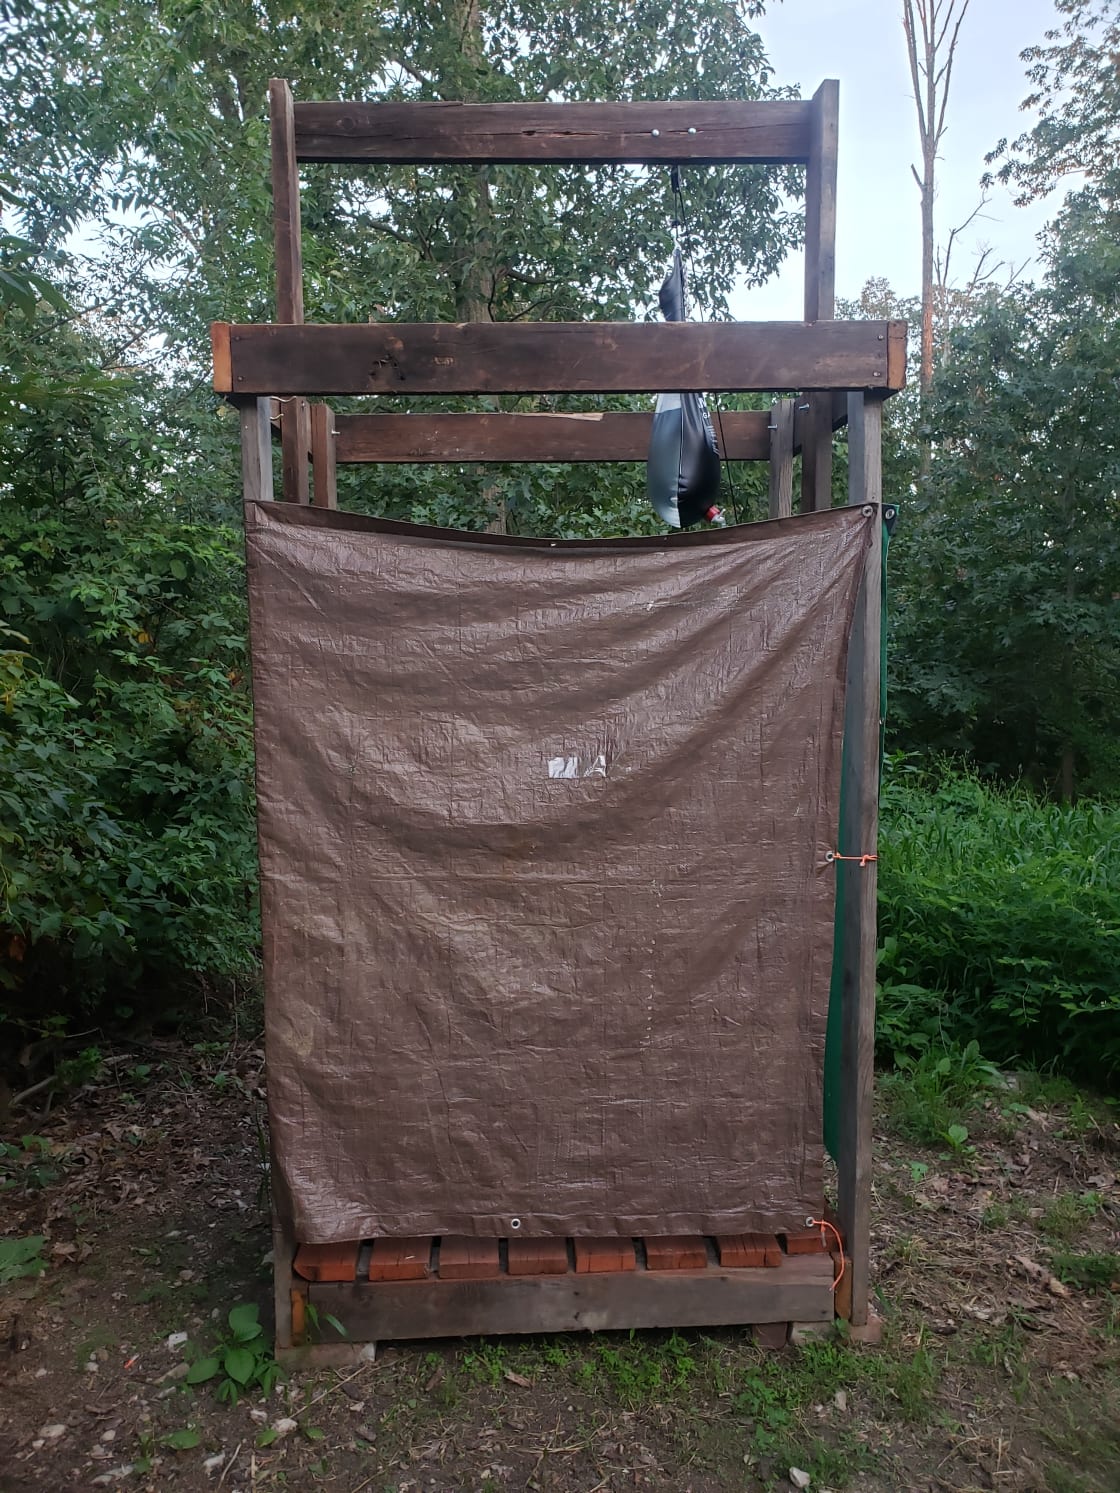 This is our outdoor camp shower/ changing room. It is completely covered and private. To open it just unhook it.